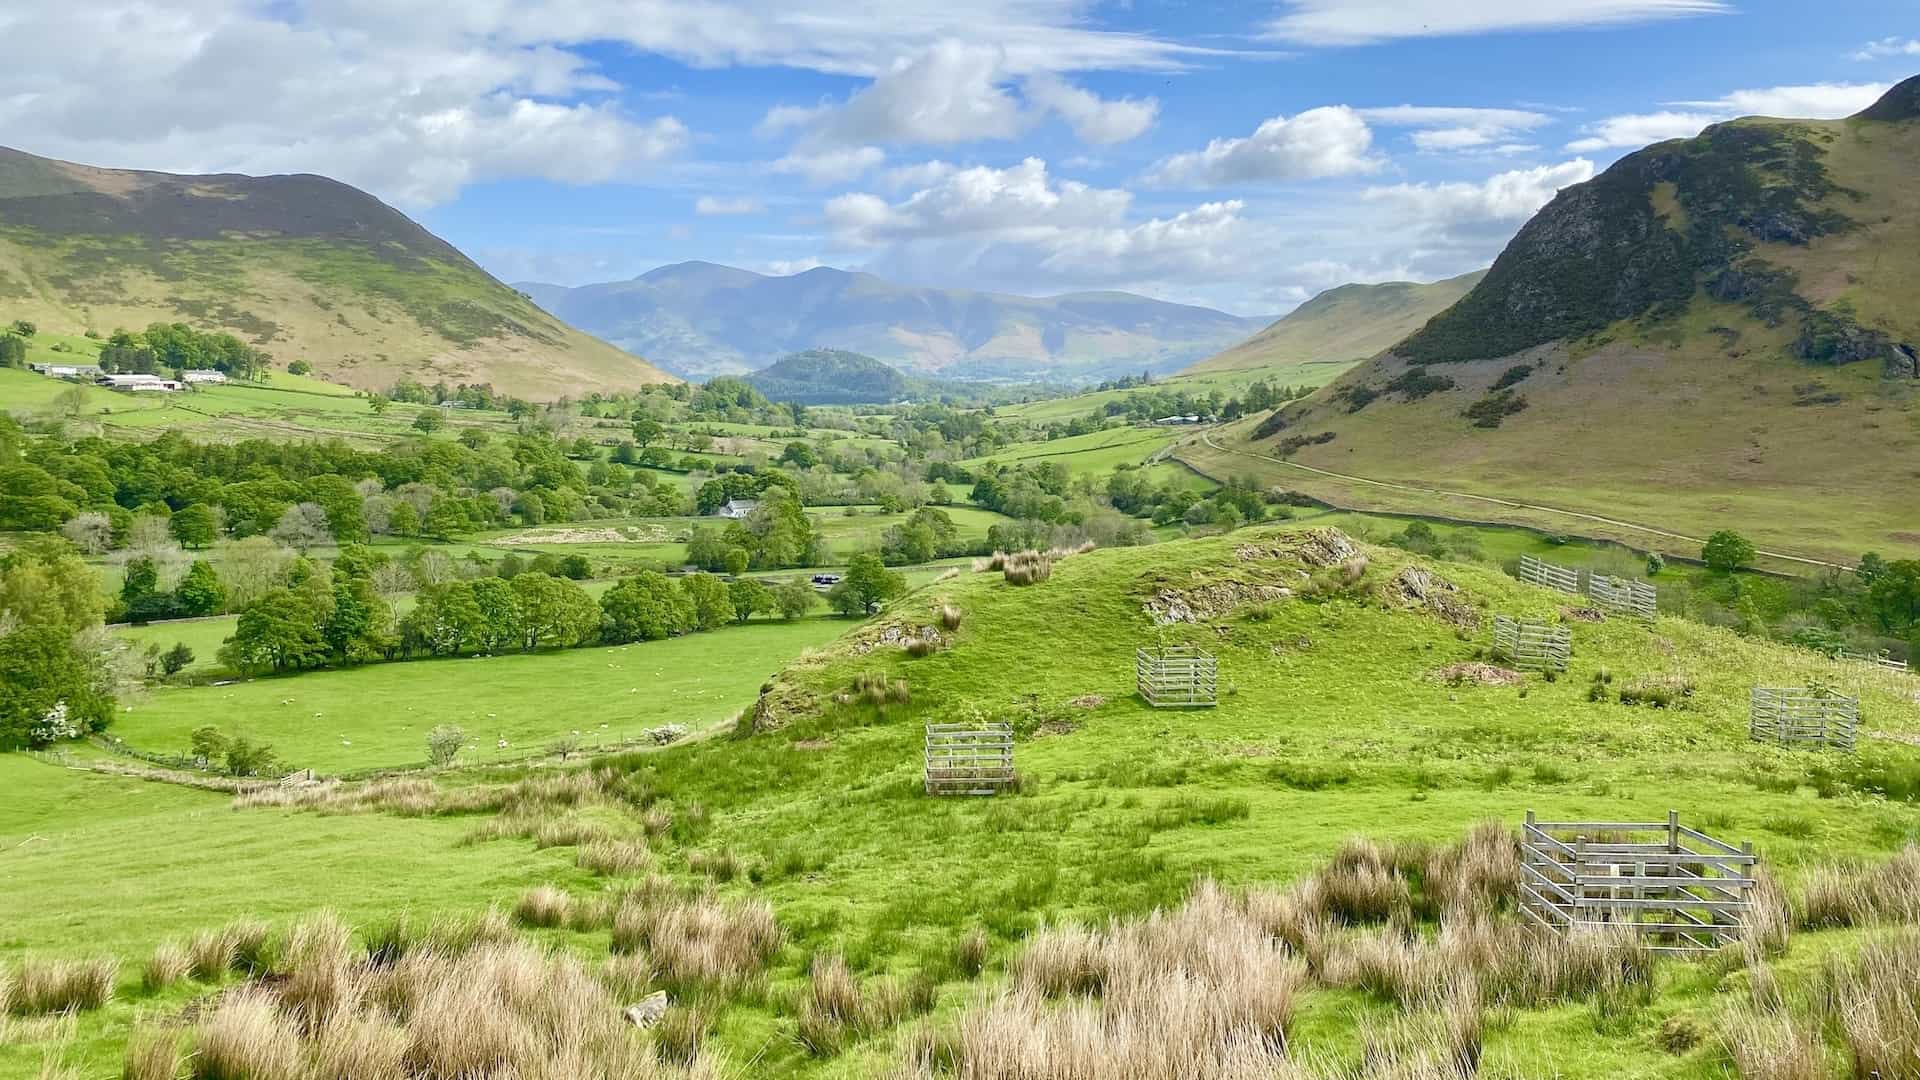 The Lake District National Park is located entirely within the county of Cumbria, North-west England, and covers an area of over 900 square miles. It was established as a national park in 1951, and in 2017 was designated a UNESCO World Heritage Site.